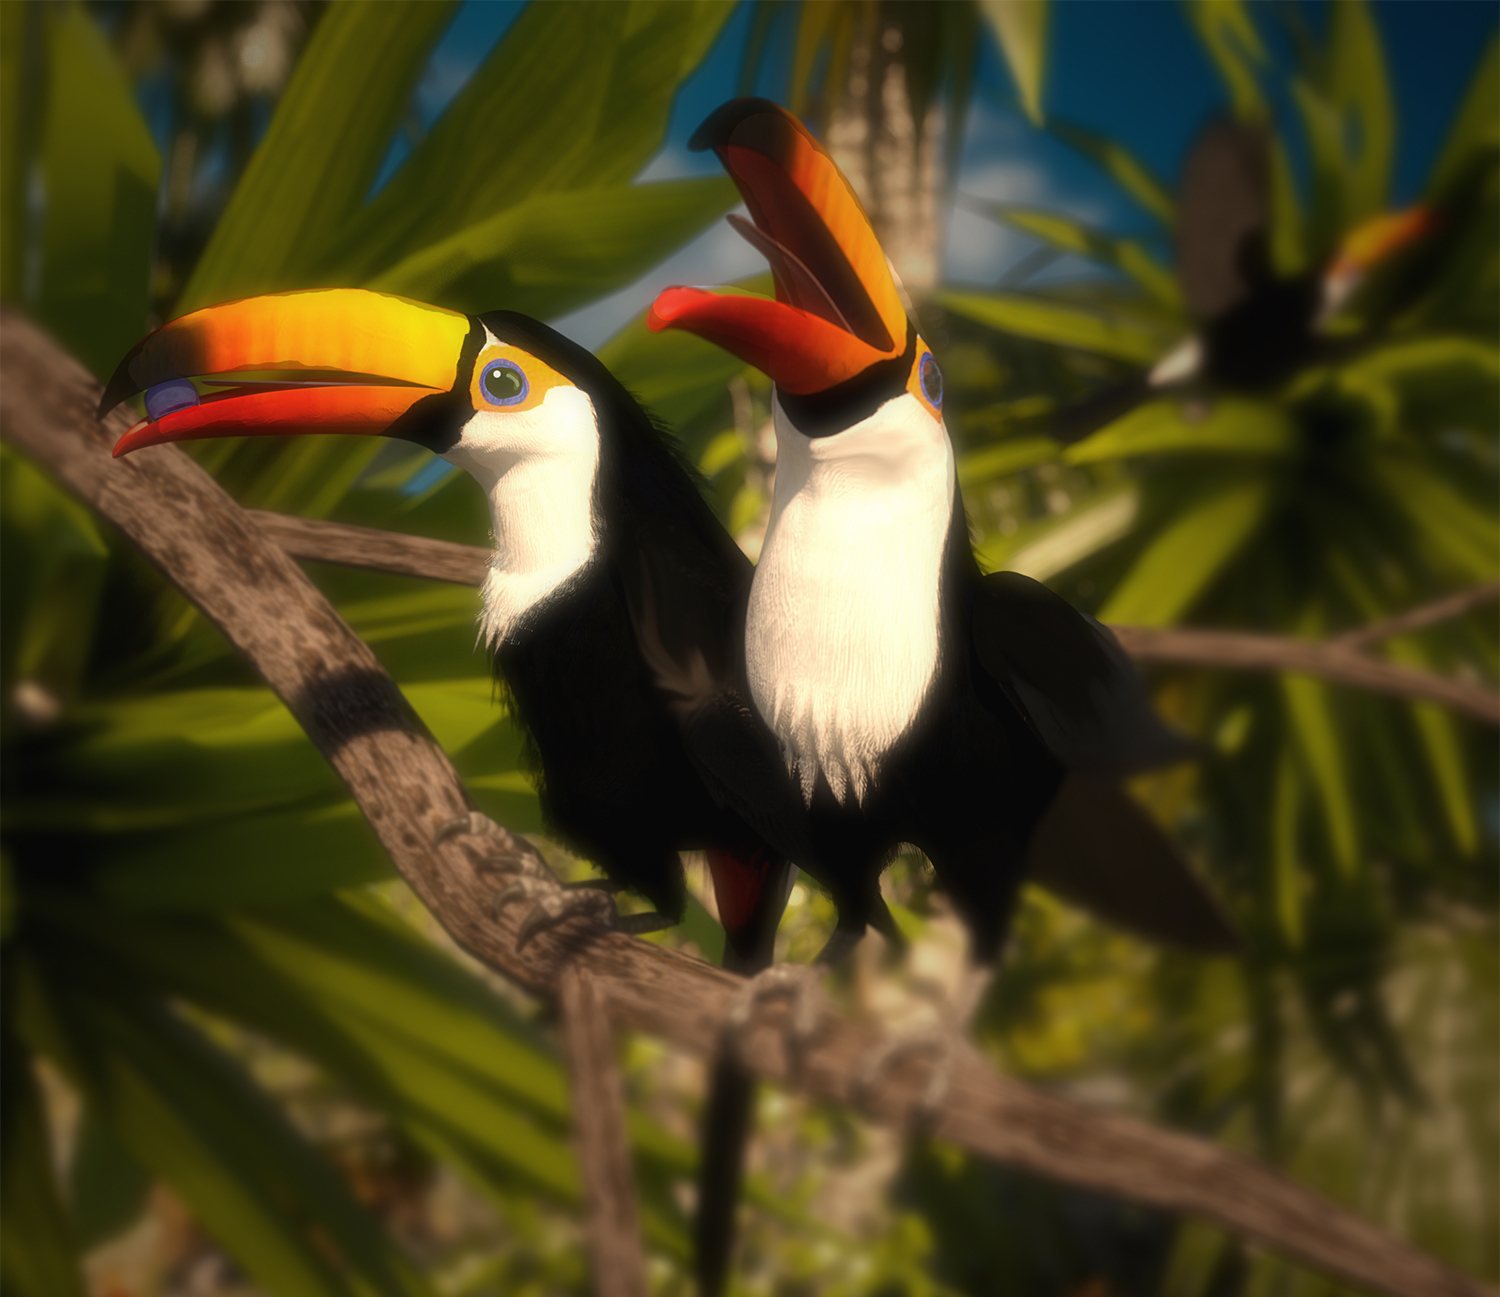 3rd Place - Sunny Toucans by Trouble